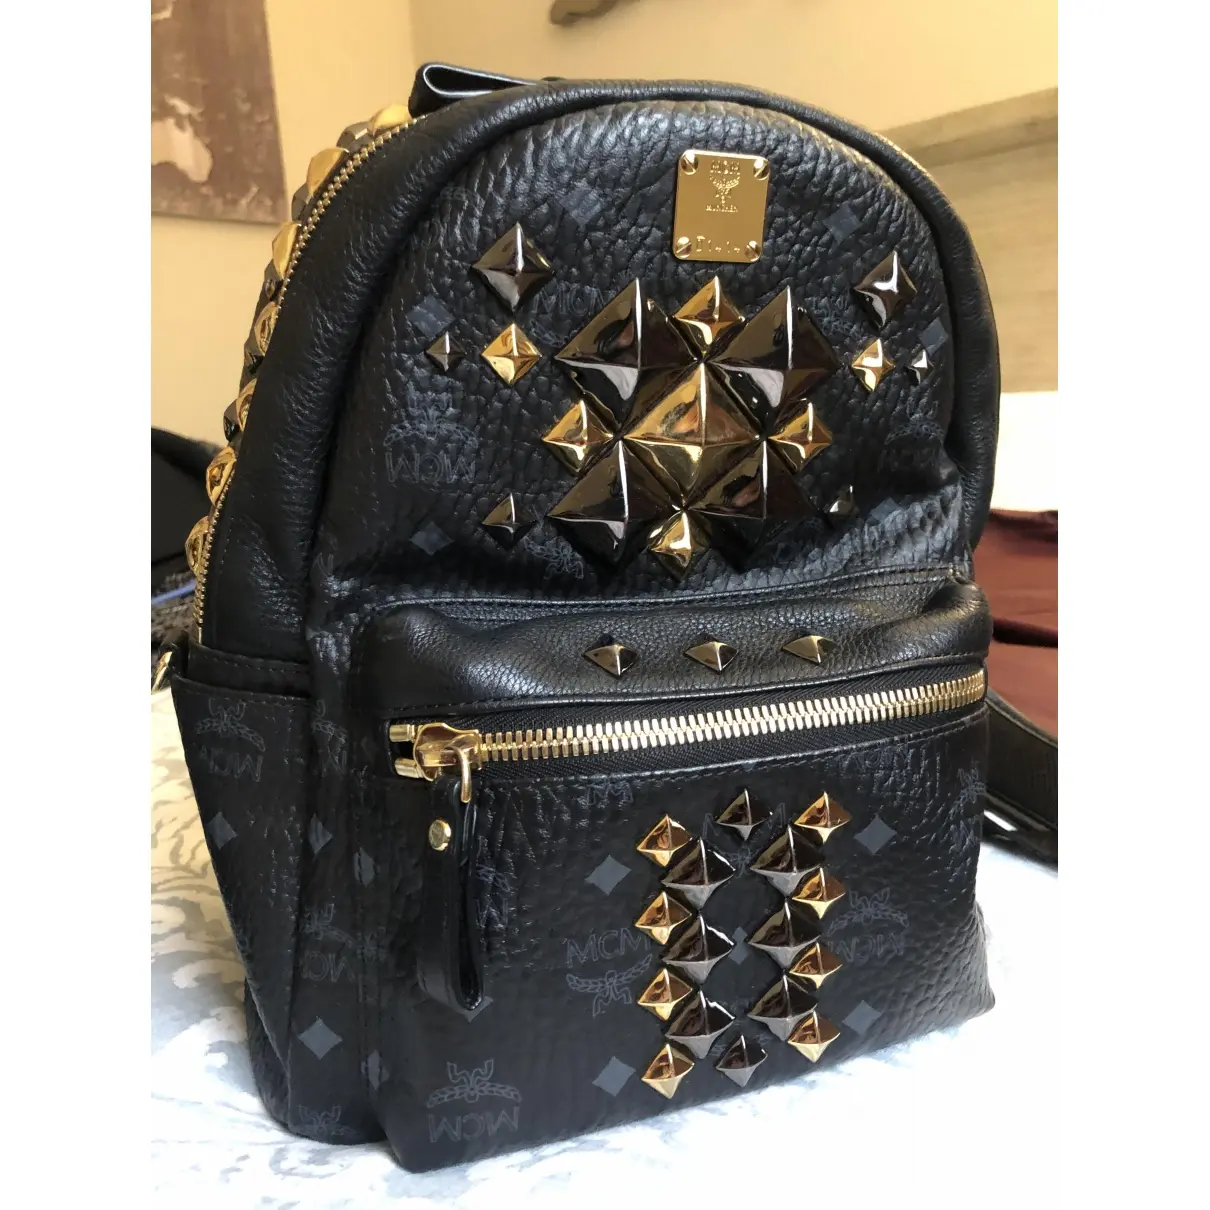 MCM Stark leather backpack for sale